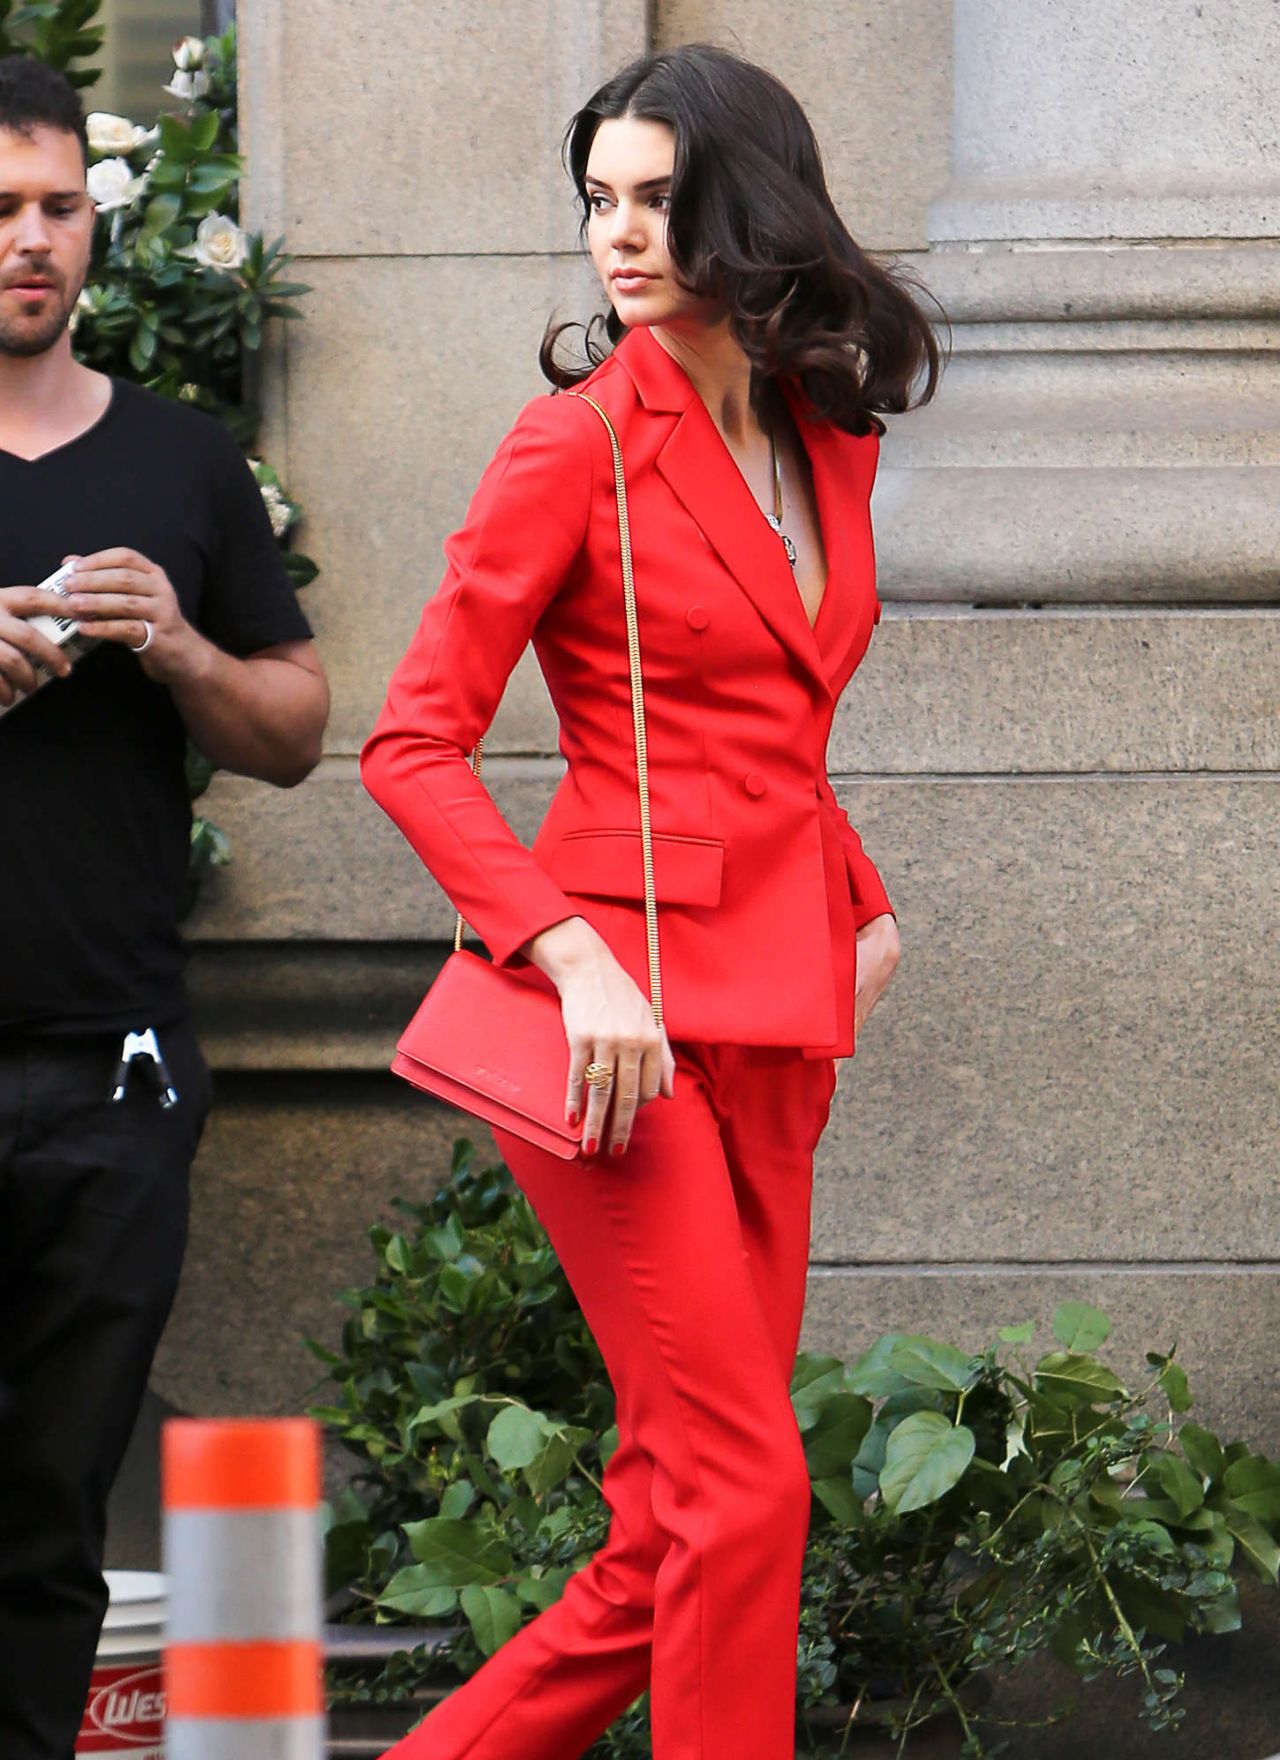 Kendall Jenner in All Red - Photoshoot in Los Angeles, November 2014 ...